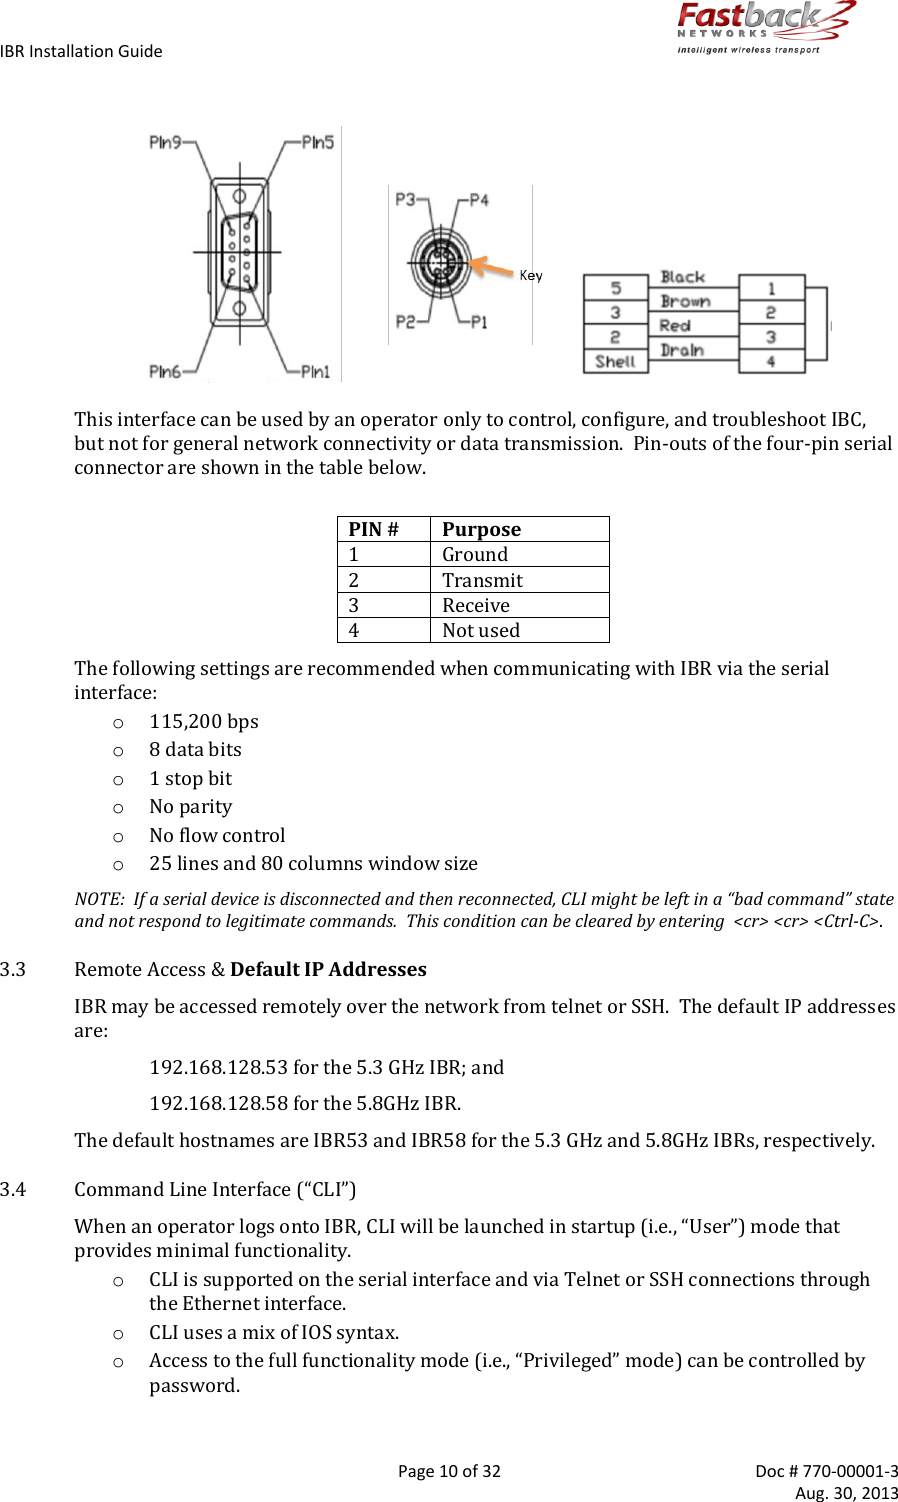 IBR Installation Guide        Page 10 of 32  Doc # 770-00001-3     Aug. 30, 2013                            This interface can be used by an operator only to control, configure, and troubleshoot IBC, but not for general network connectivity or data transmission.  Pin-outs of the four-pin serial connector are shown in the table below.  PIN # Purpose 1 Ground 2 Transmit 3 Receive 4 Not used The following settings are recommended when communicating with IBR via the serial interface: o 115,200 bps o 8 data bits o 1 stop bit o No parity o No flow control o 25 lines and 80 columns window size NOTE:  If a serial device is disconnected and then reconnected, CLI might be left in a “bad command” state and not respond to legitimate commands.  This condition can be cleared by entering  &lt;cr&gt; &lt;cr&gt; &lt;Ctrl-C&gt;. 3.3 Remote Access &amp; Default IP Addresses IBR may be accessed remotely over the network from telnet or SSH.  The default IP addresses are:    192.168.128.53 for the 5.3 GHz IBR; and 192.168.128.58 for the 5.8GHz IBR.     The default hostnames are IBR53 and IBR58 for the 5.3 GHz and 5.8GHz IBRs, respectively. 3.4 Command Line Interface (“CLI”) When an operator logs onto IBR, CLI will be launched in startup (i.e., “User”) mode that provides minimal functionality. o CLI is supported on the serial interface and via Telnet or SSH connections through the Ethernet interface. o CLI uses a mix of IOS syntax. o Access to the full functionality mode (i.e., “Privileged” mode) can be controlled by password.  